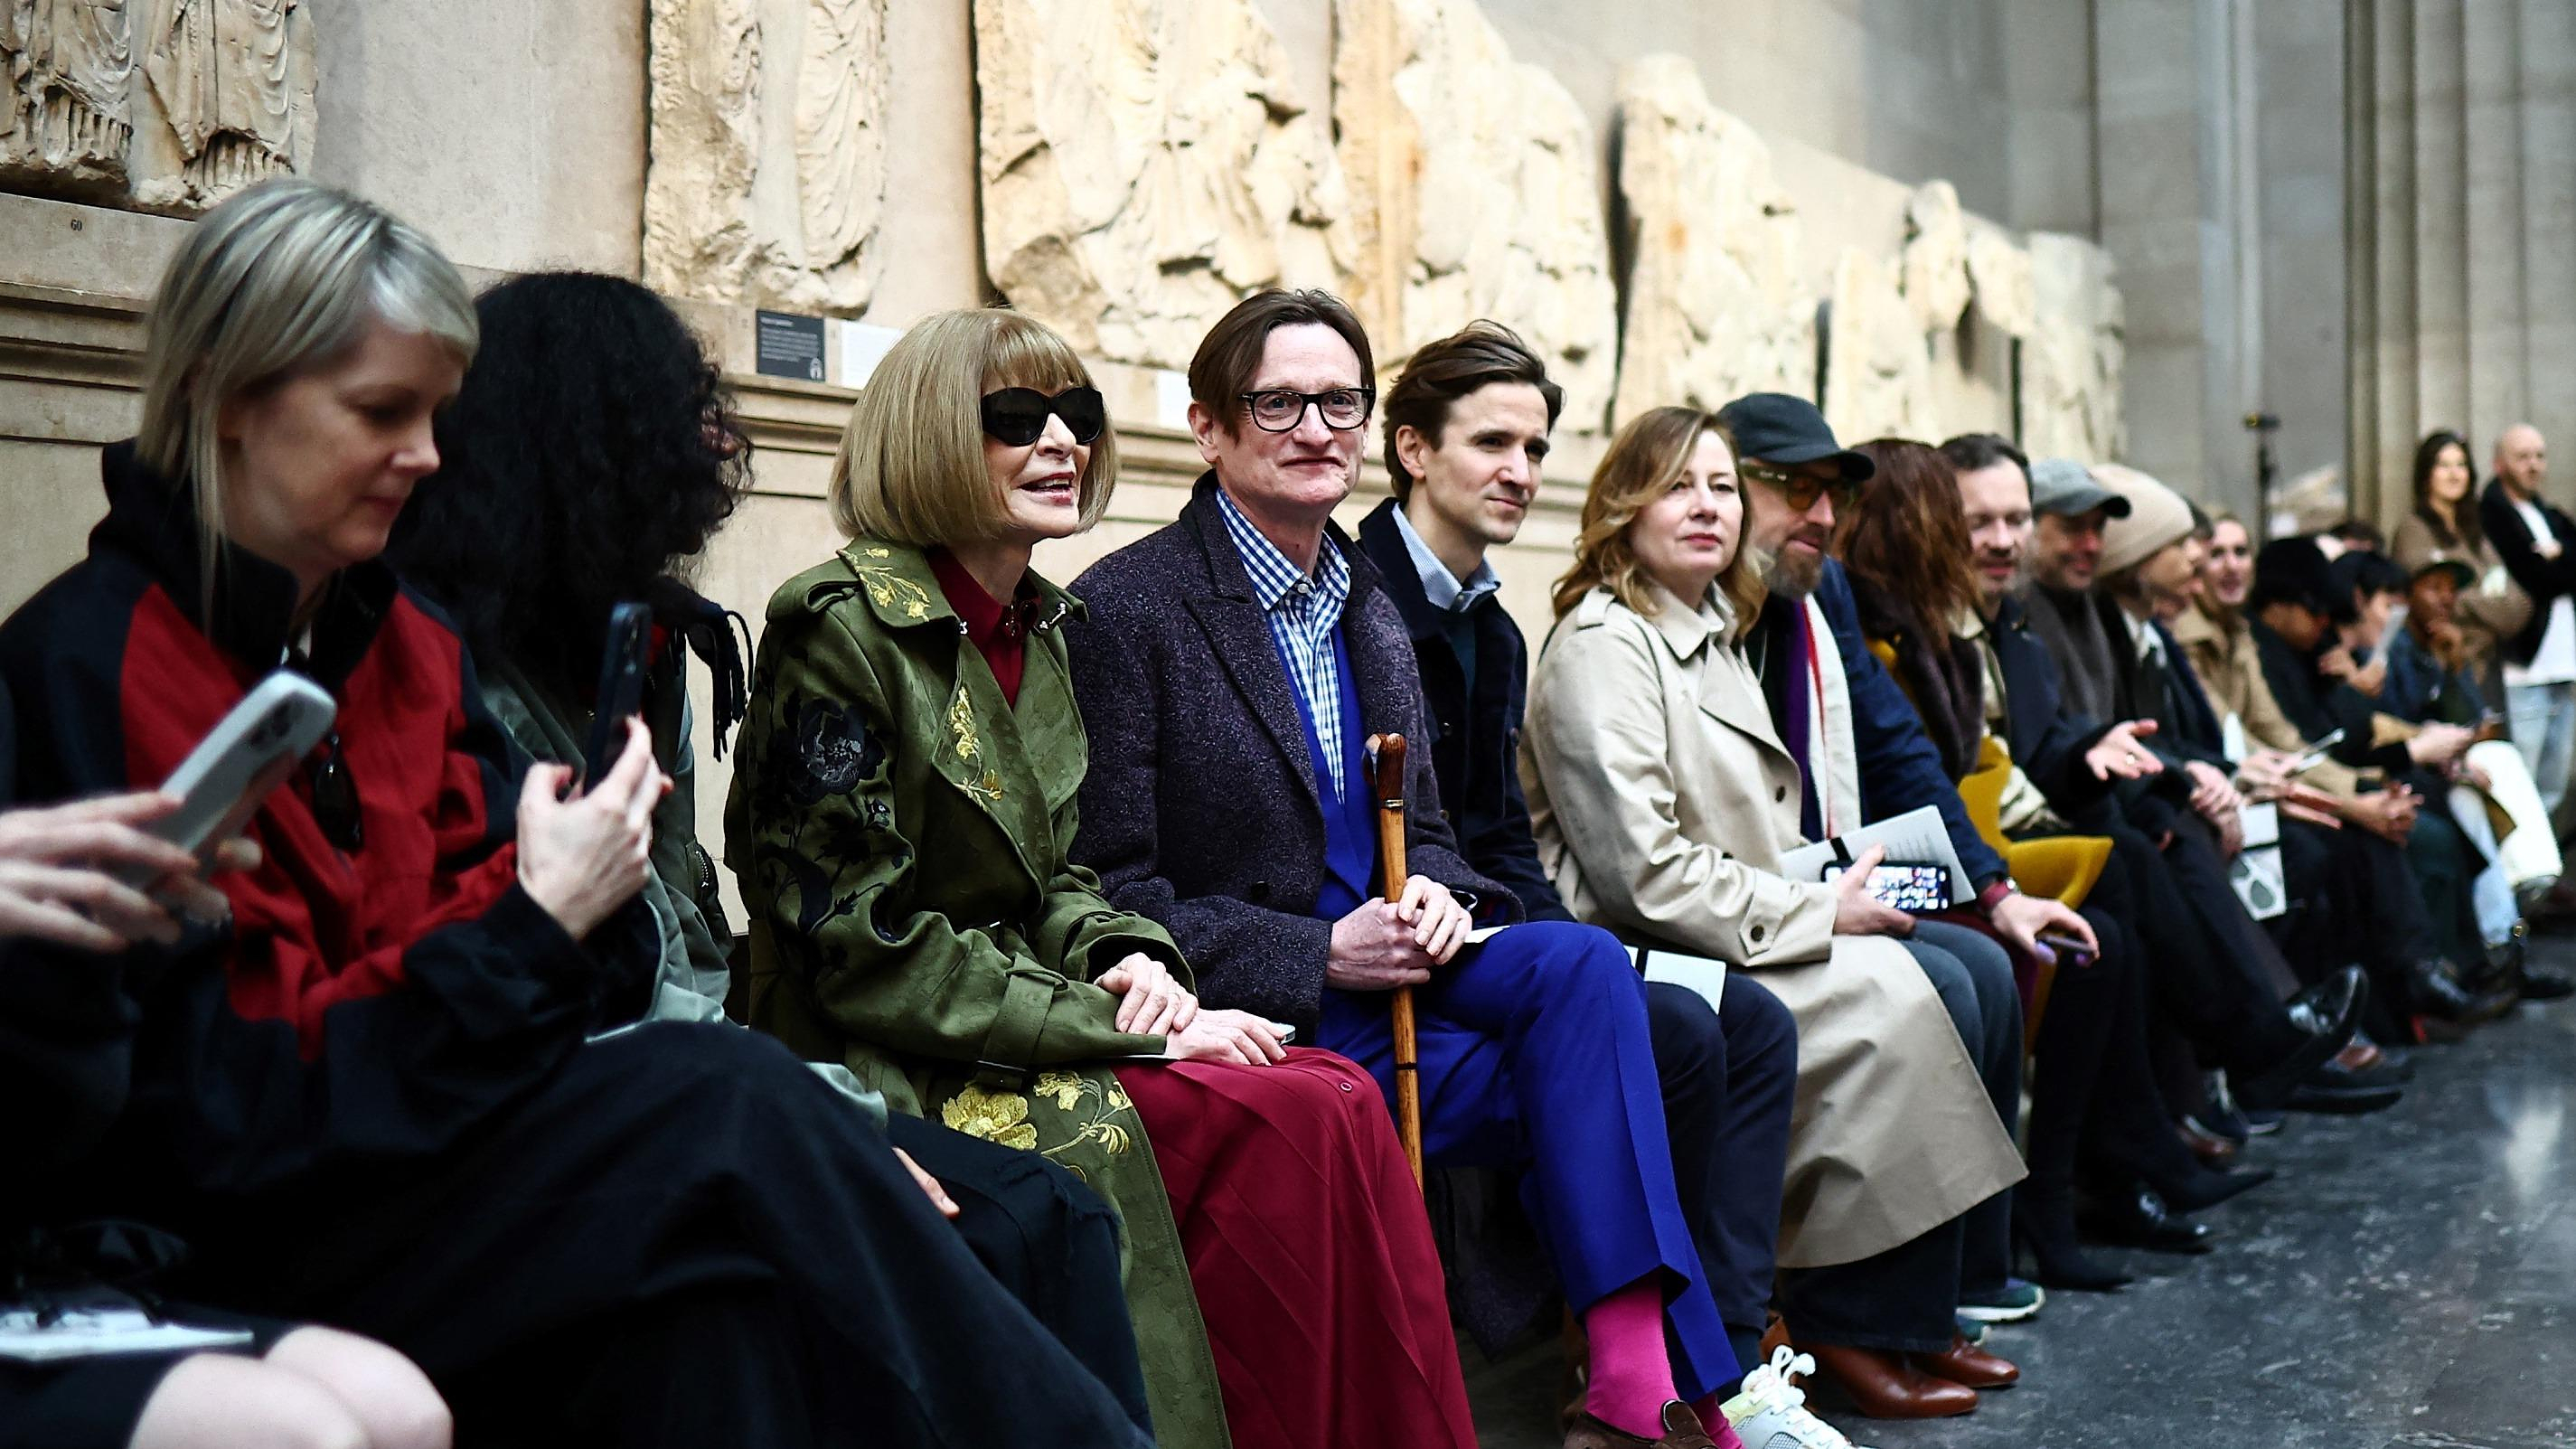 A fashion show in front of the Parthenon friezes in London scandalizes Athens